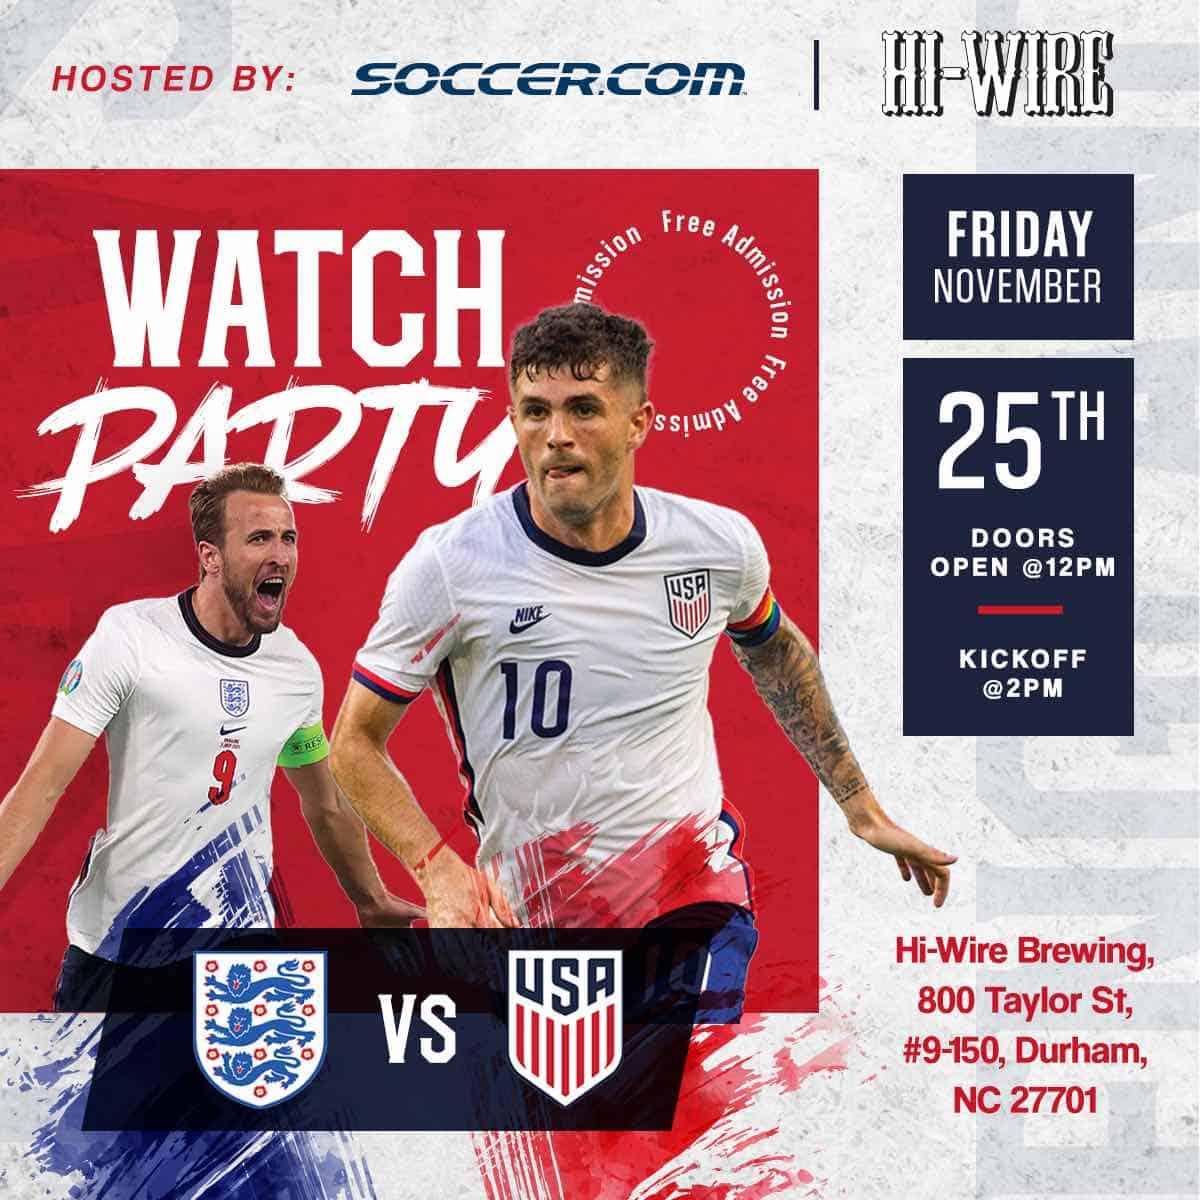 hi-wire-brewing-world-cup-watch-party